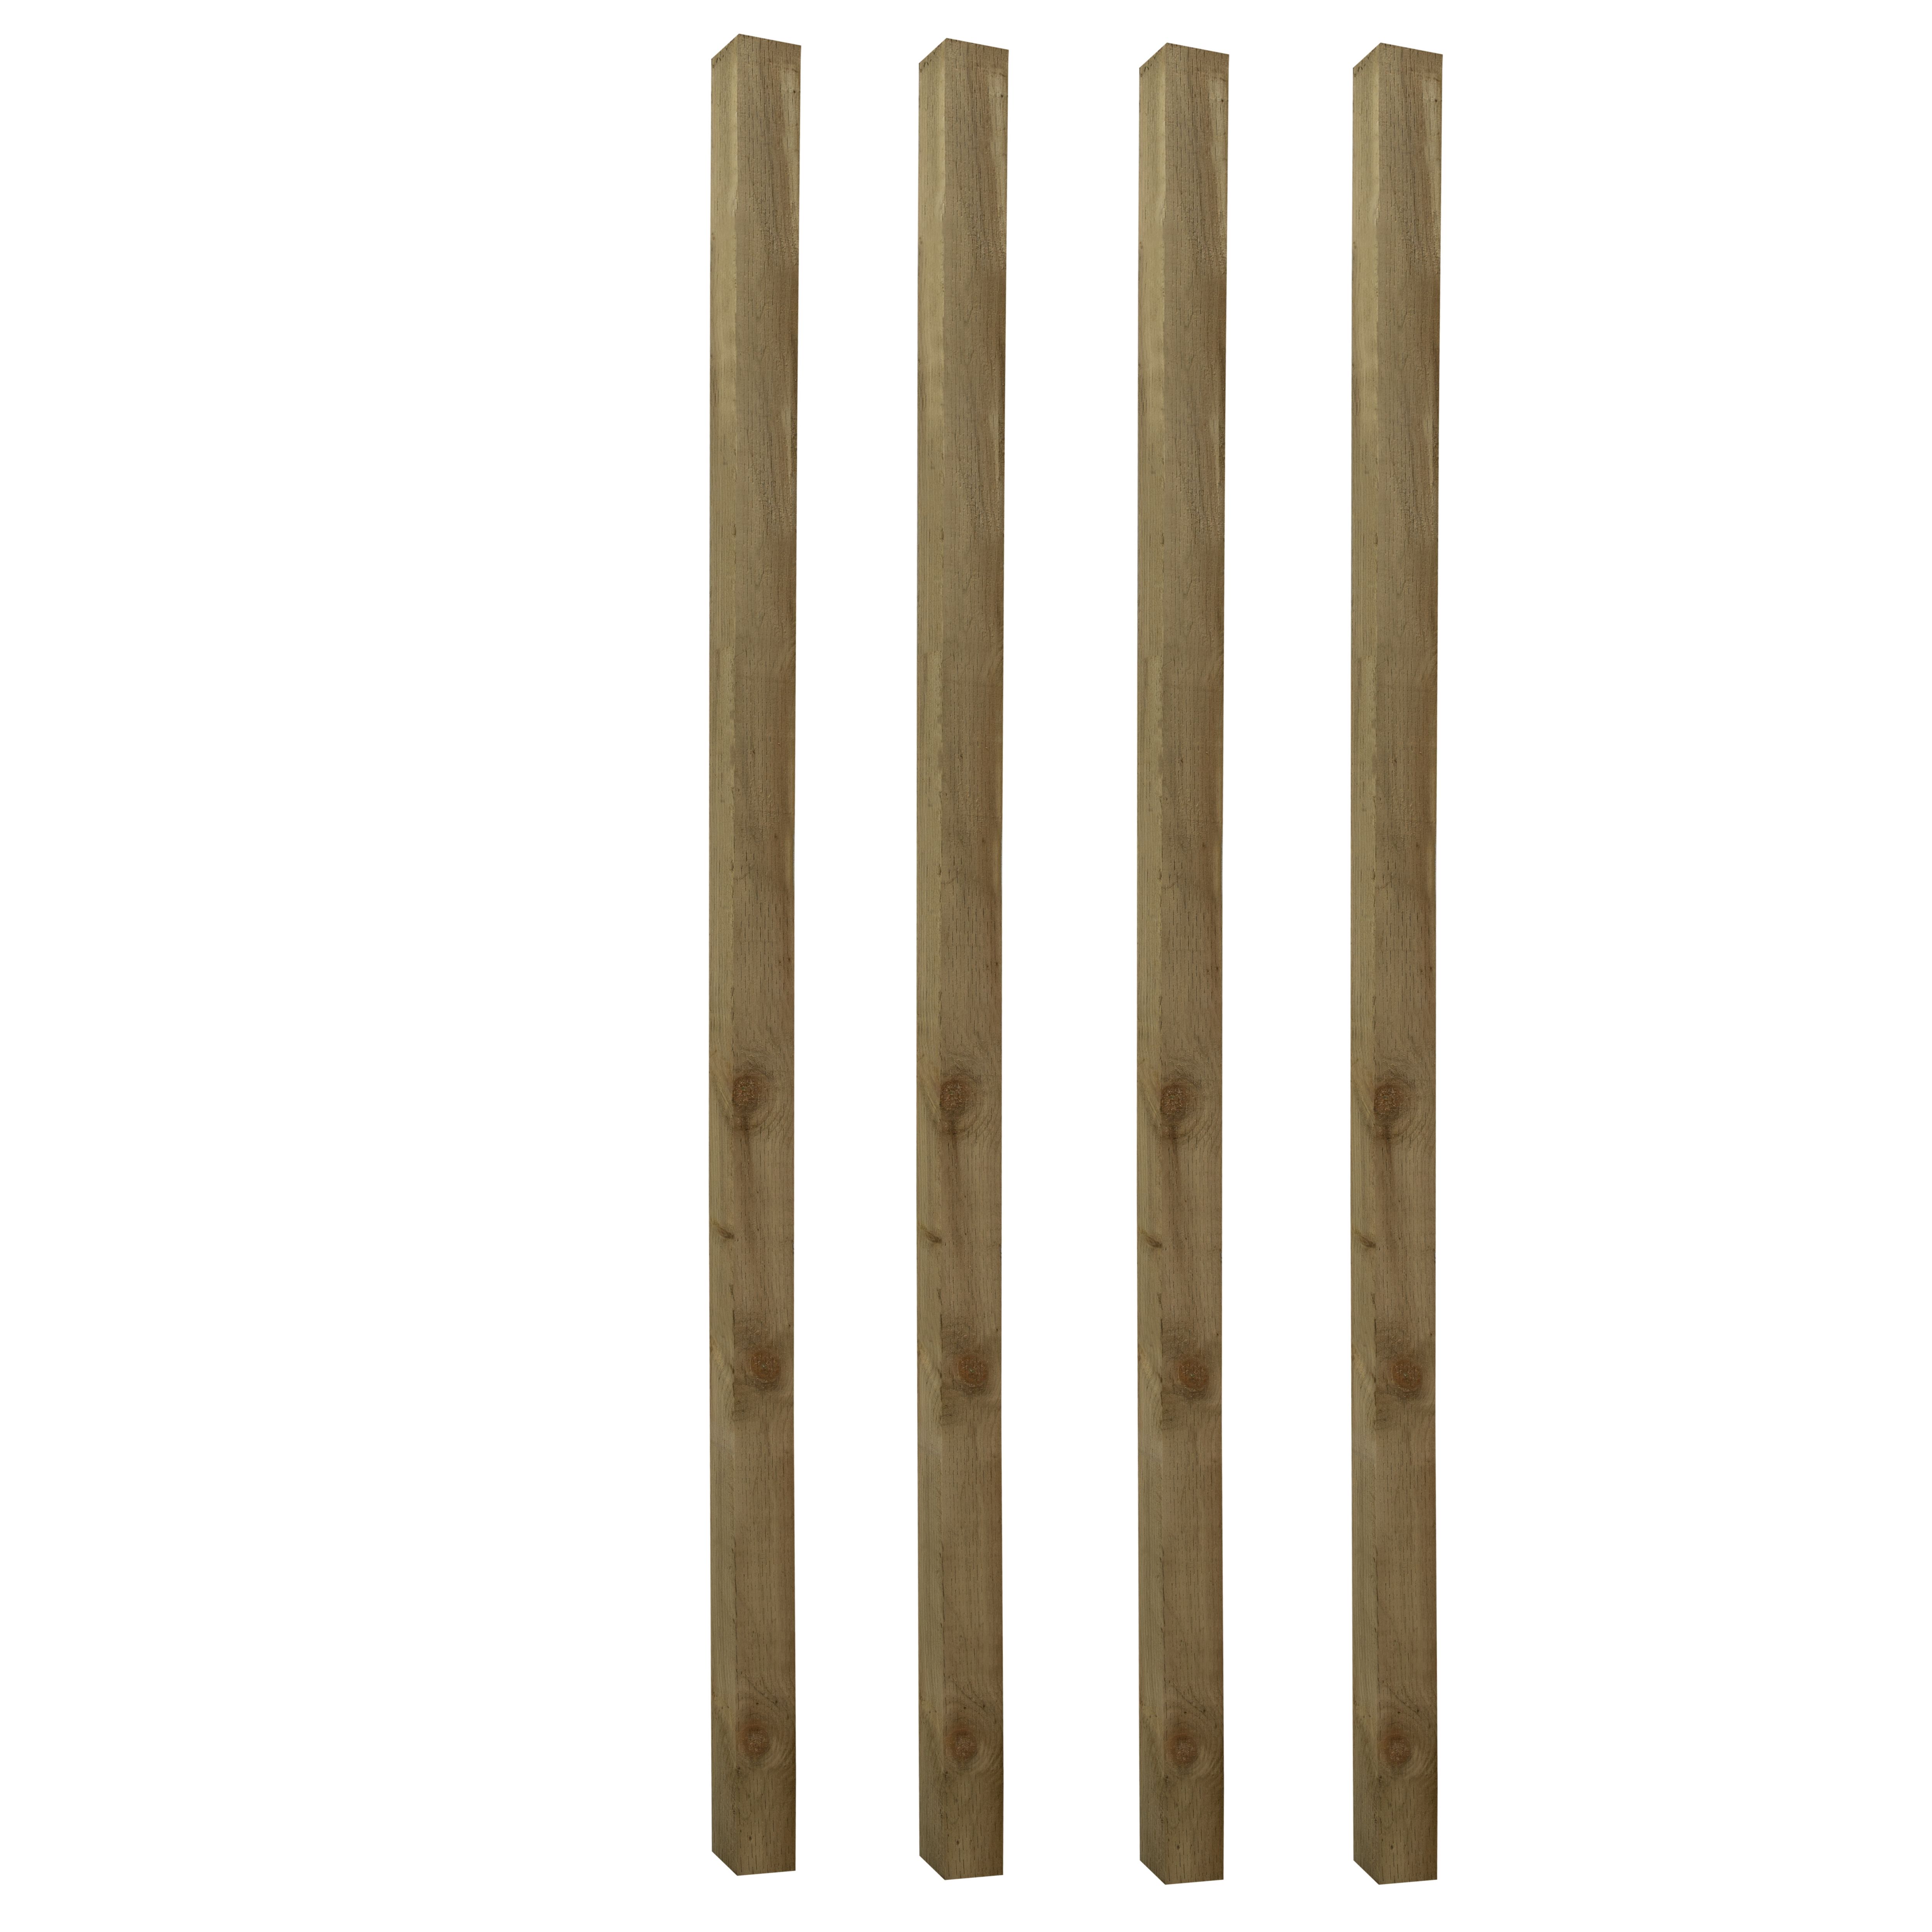 UC4 Green Square Wooden Fence post (H)2.4m (W)75mm, Pack of 4